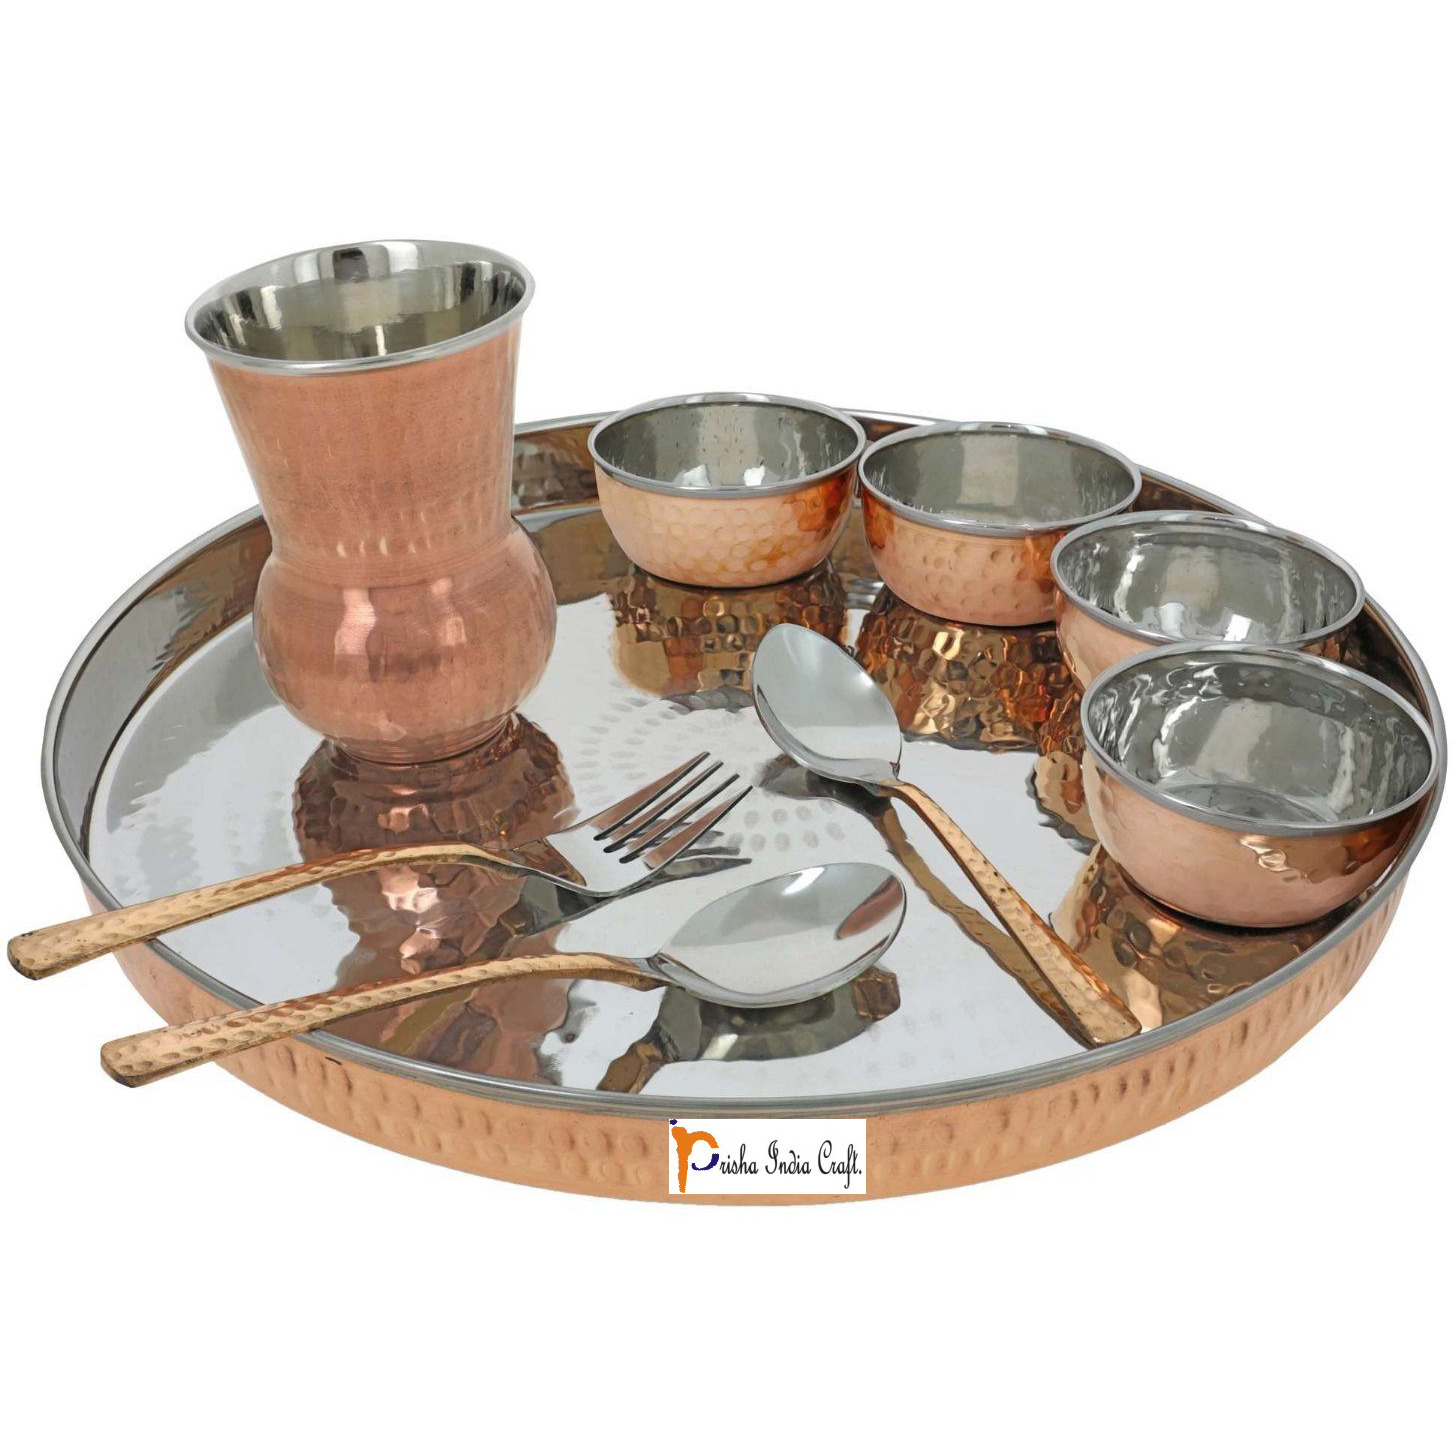 Prisha India Craft B. Set of 5 Dinnerware Traditional Stainless Steel Copper Dinner Set of Thali Plate, Bowls, Glass and Spoons, Dia 13  With 1 Luxury Style Pure Copper Pitcher Jug - Christmas Gift